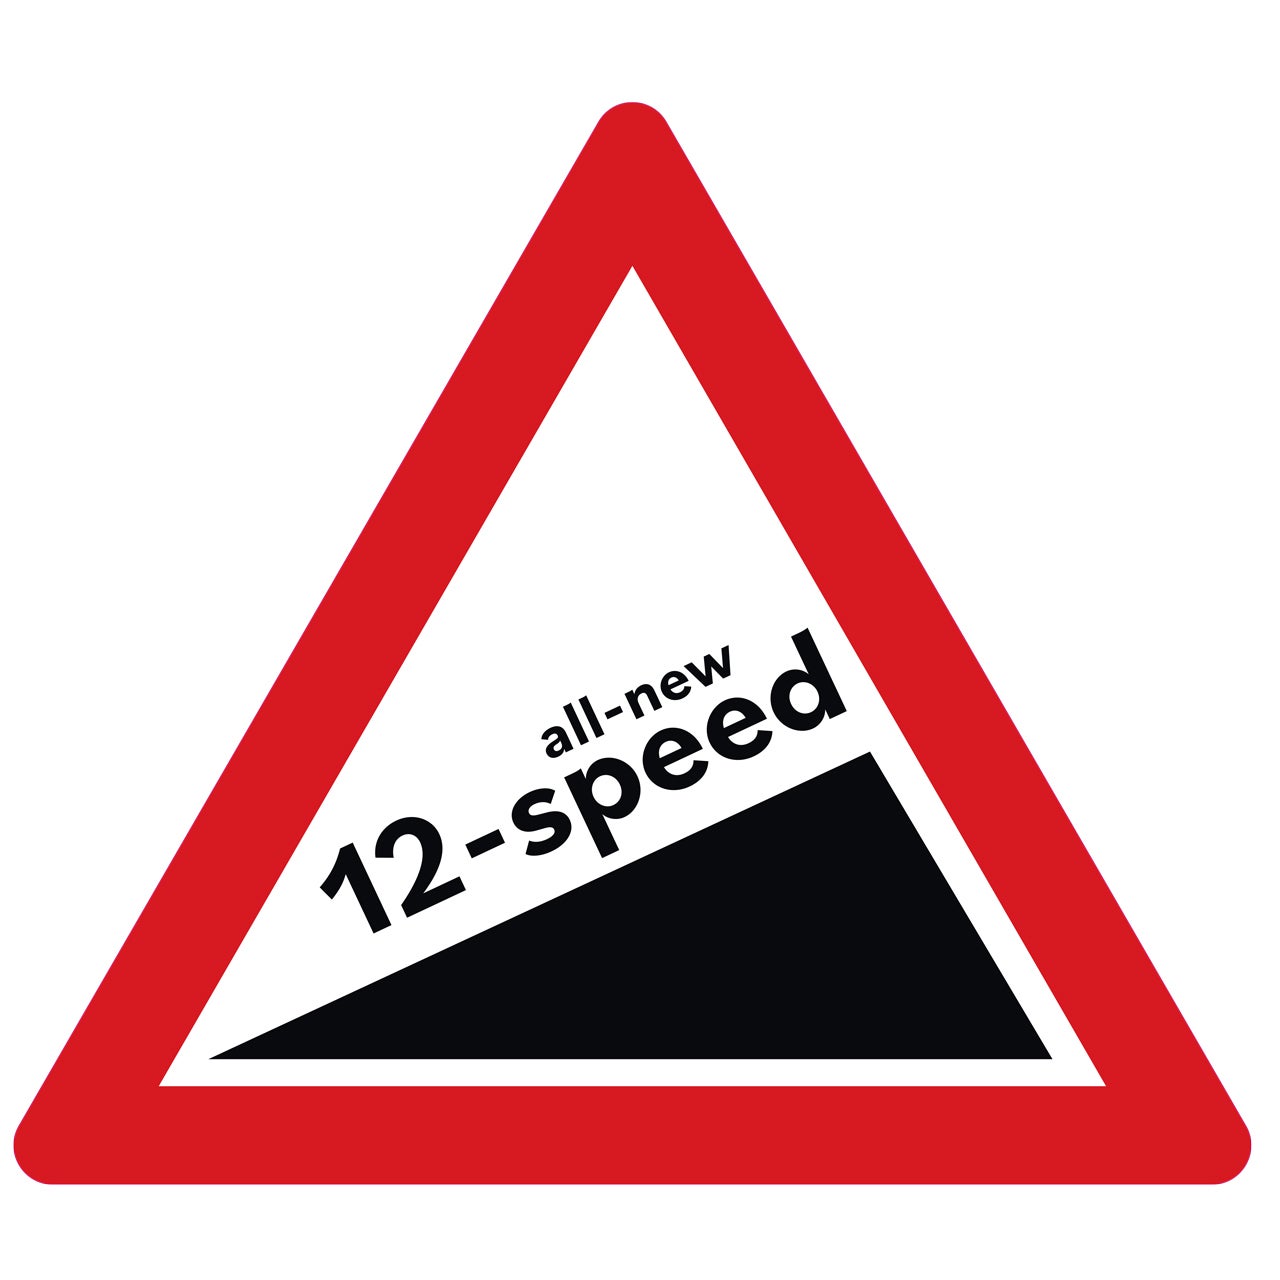 12 speed hill sign